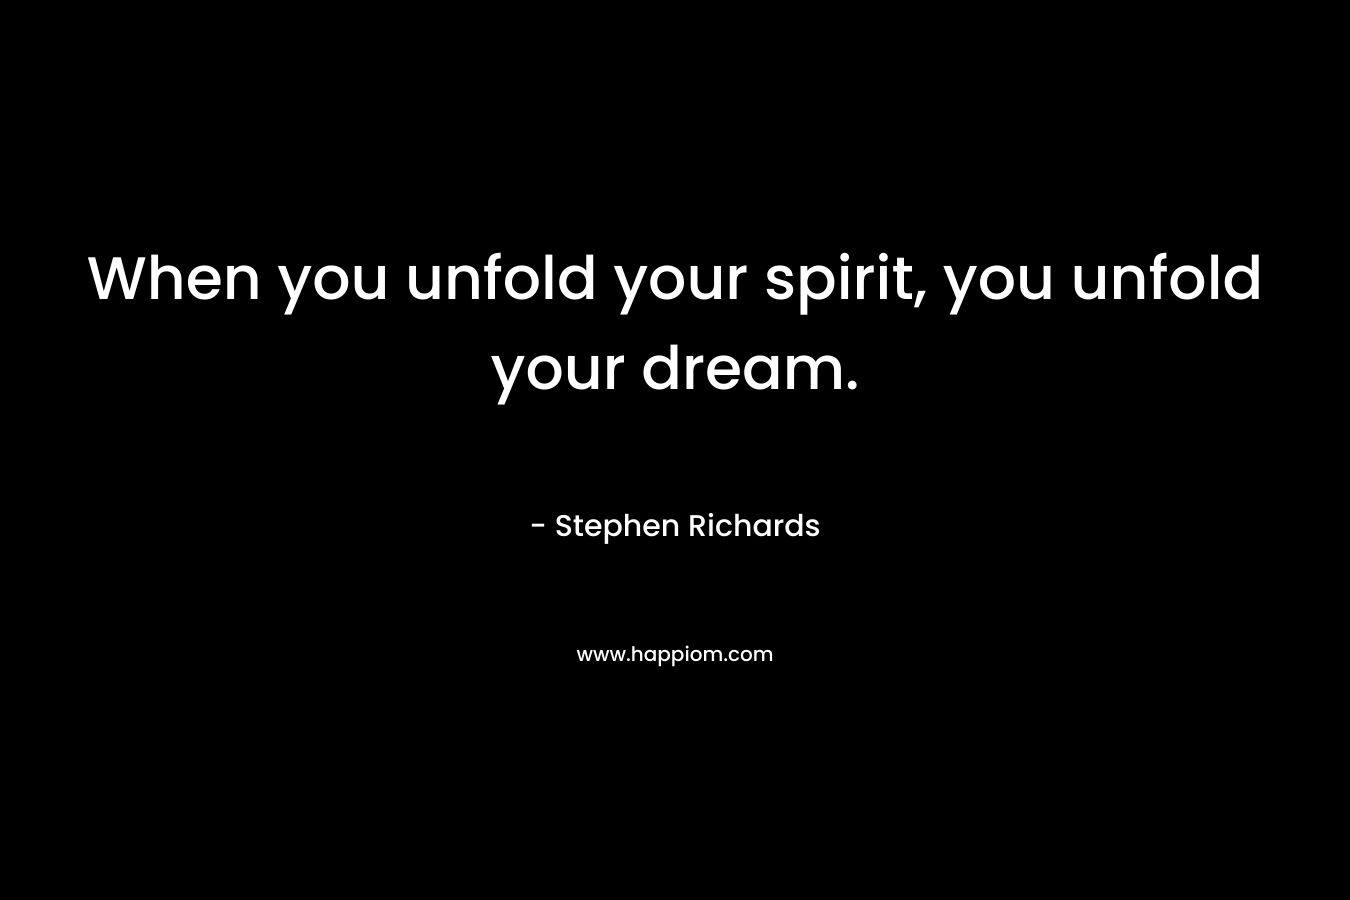 When you unfold your spirit, you unfold your dream. – Stephen Richards